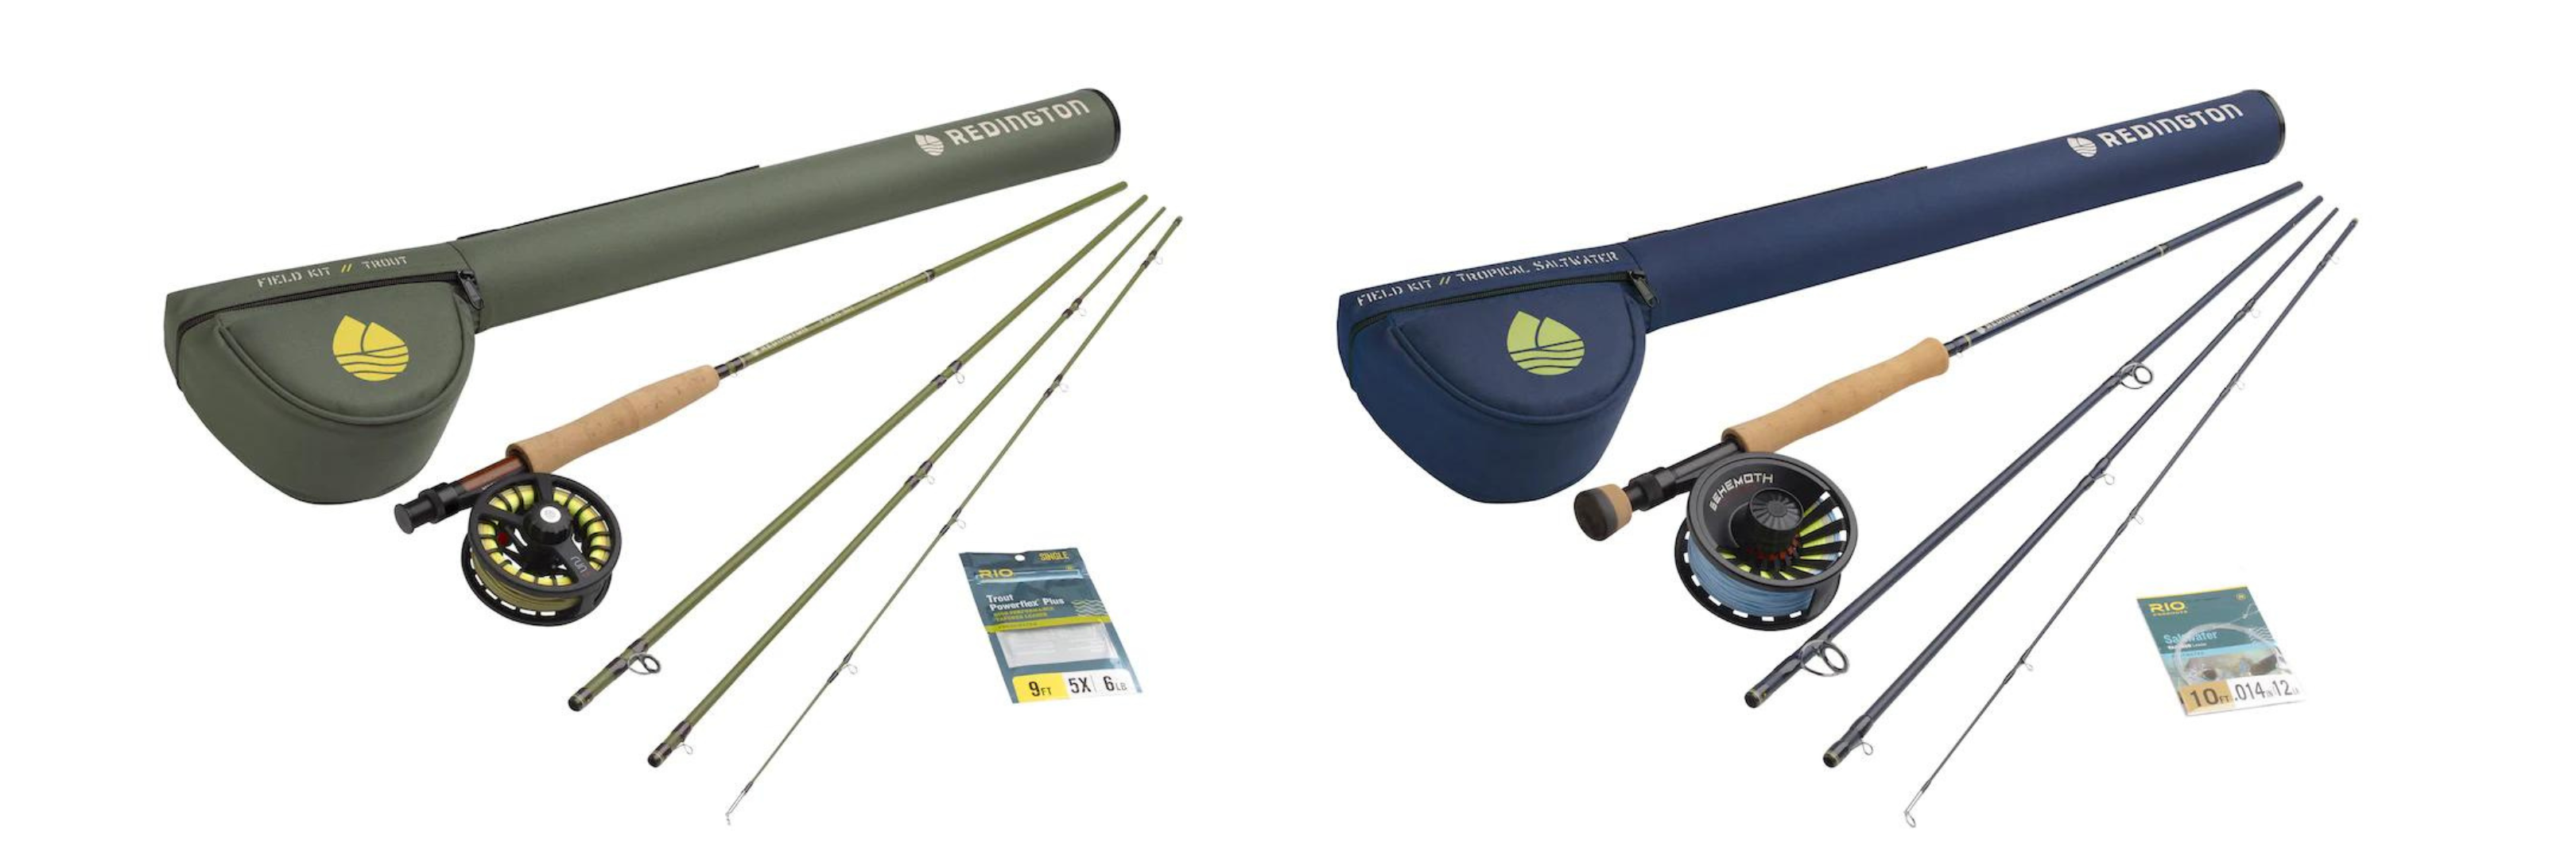 Entry Level Fly Rod and Reel Outfits, Combos